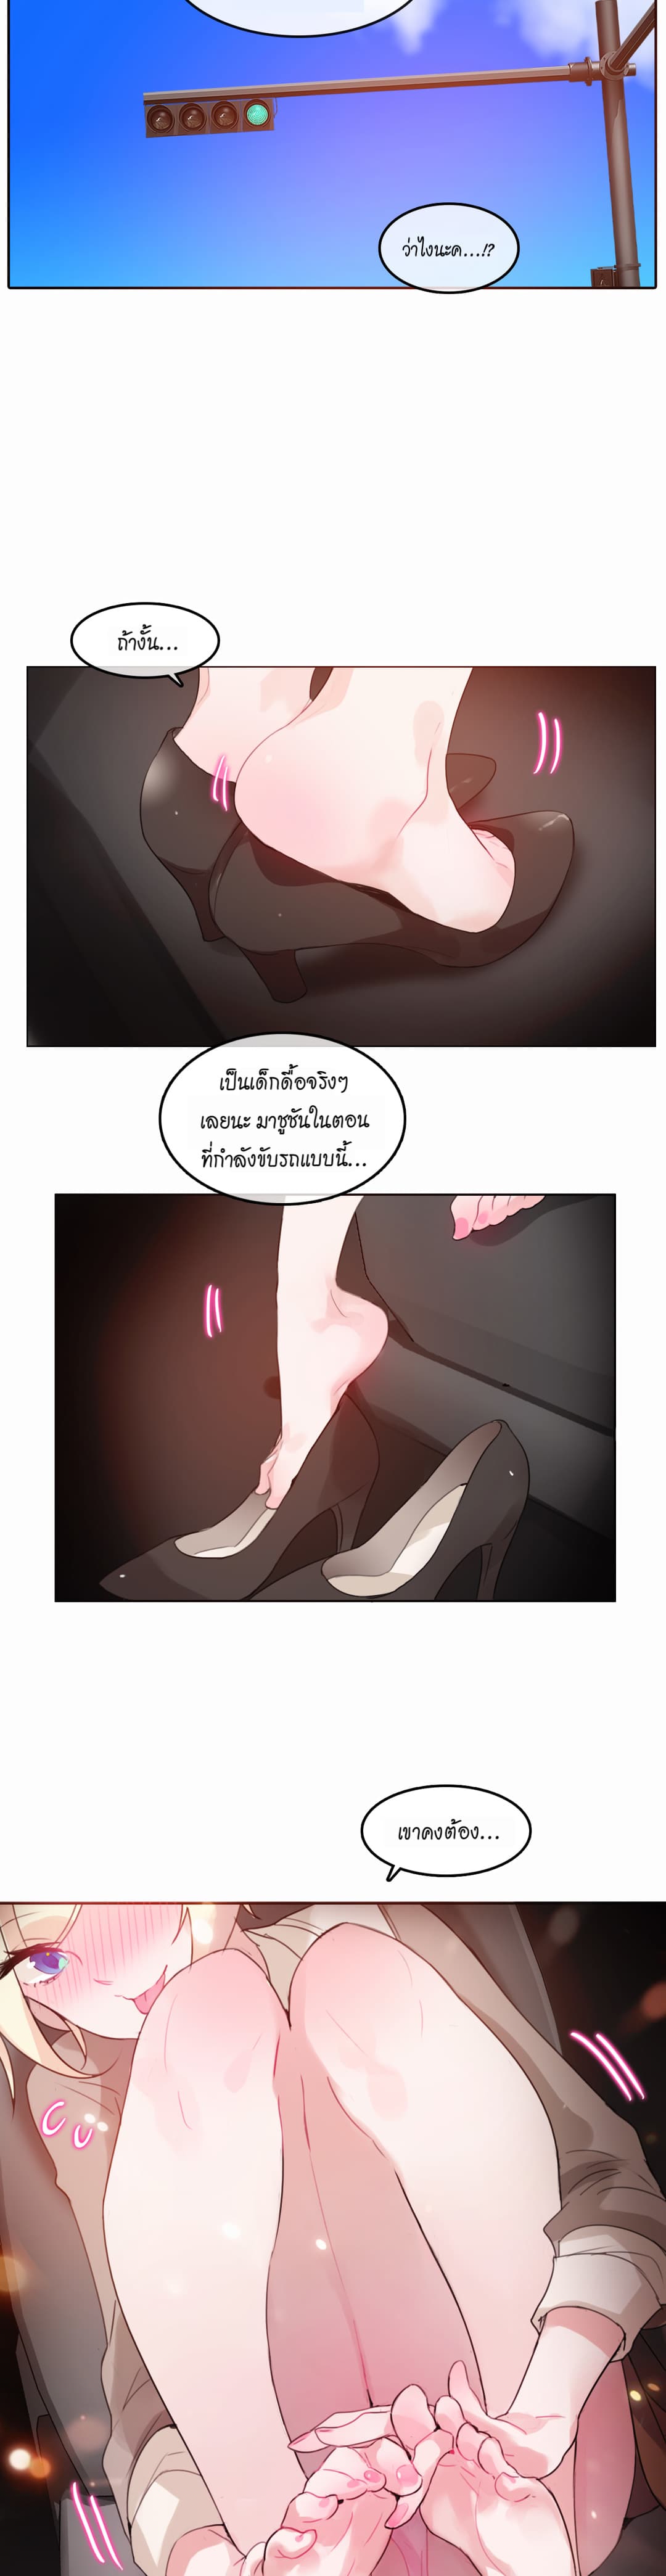 A Pervert’s Daily Life 19 (4)